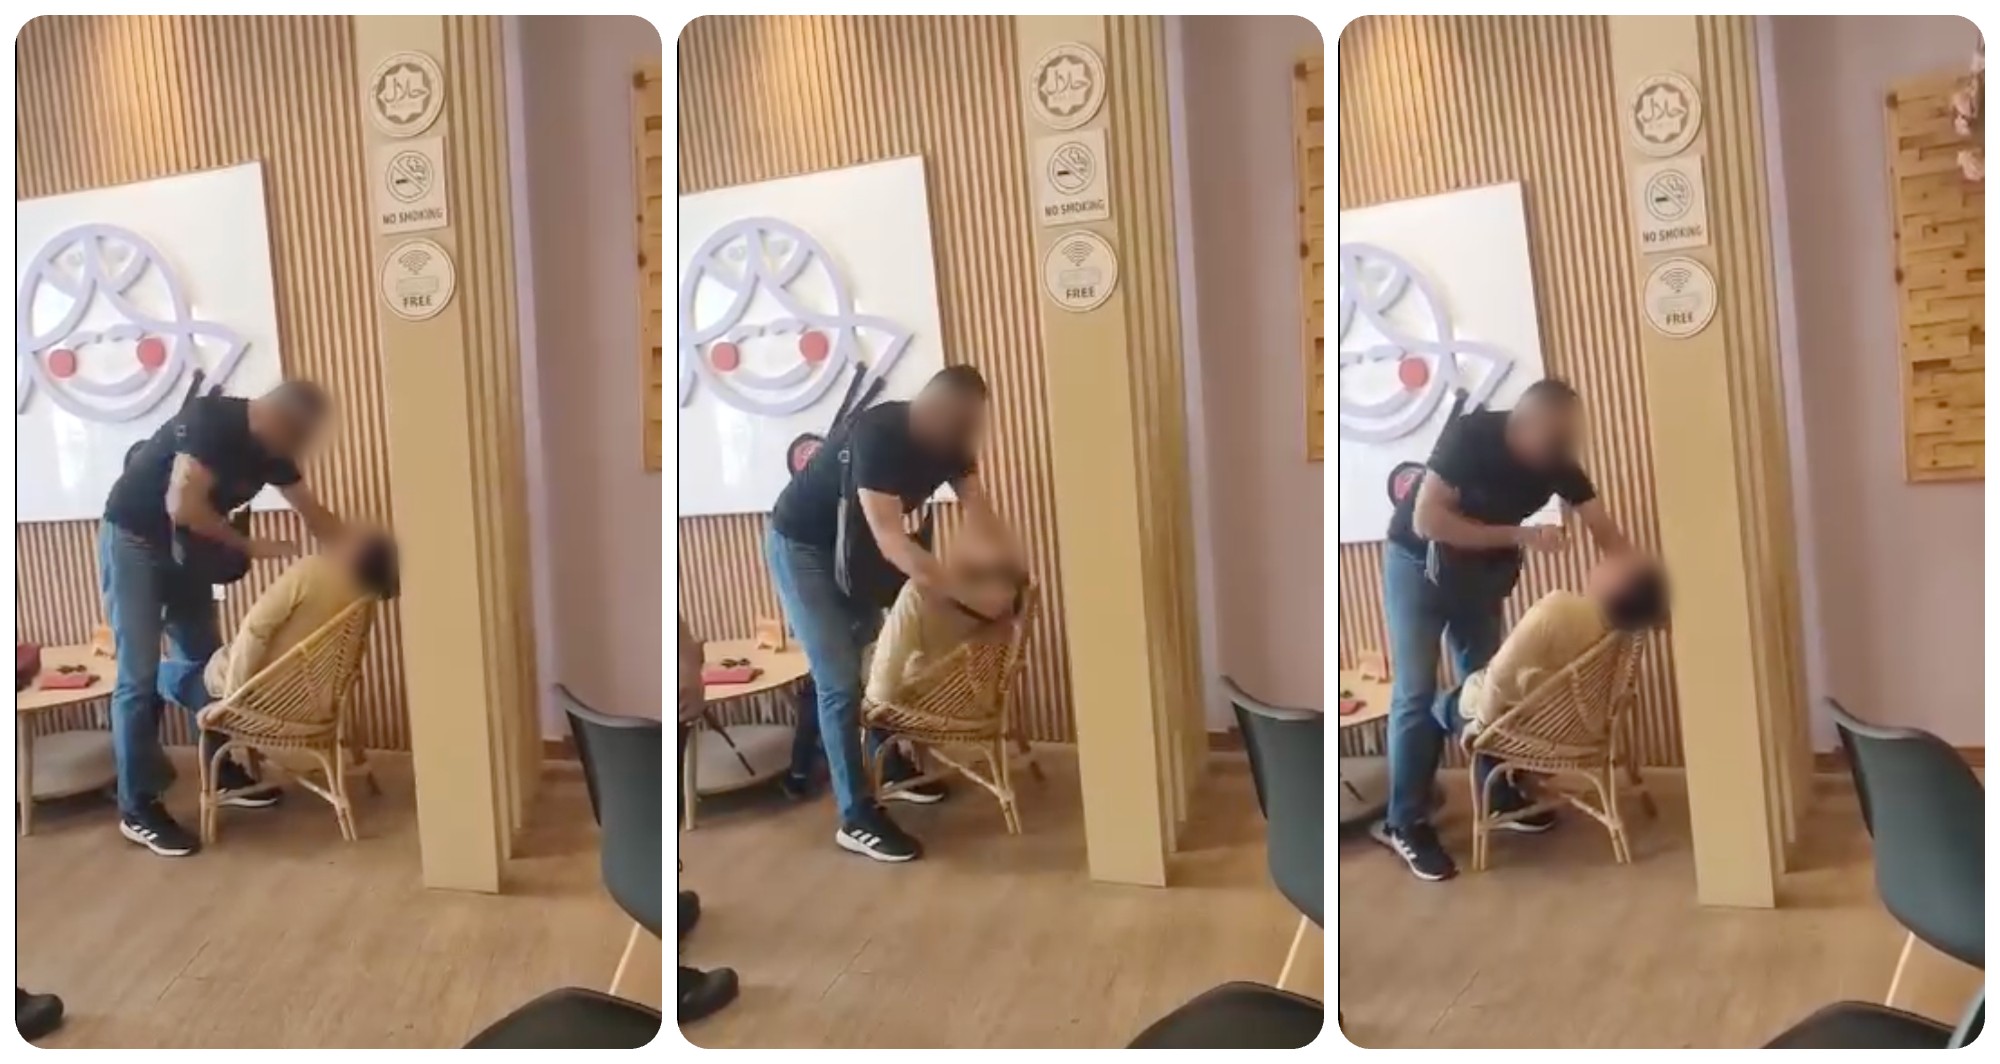 Man caught on video berating, slapping, pulling man's hair is head of police station, Johor police chief confirms